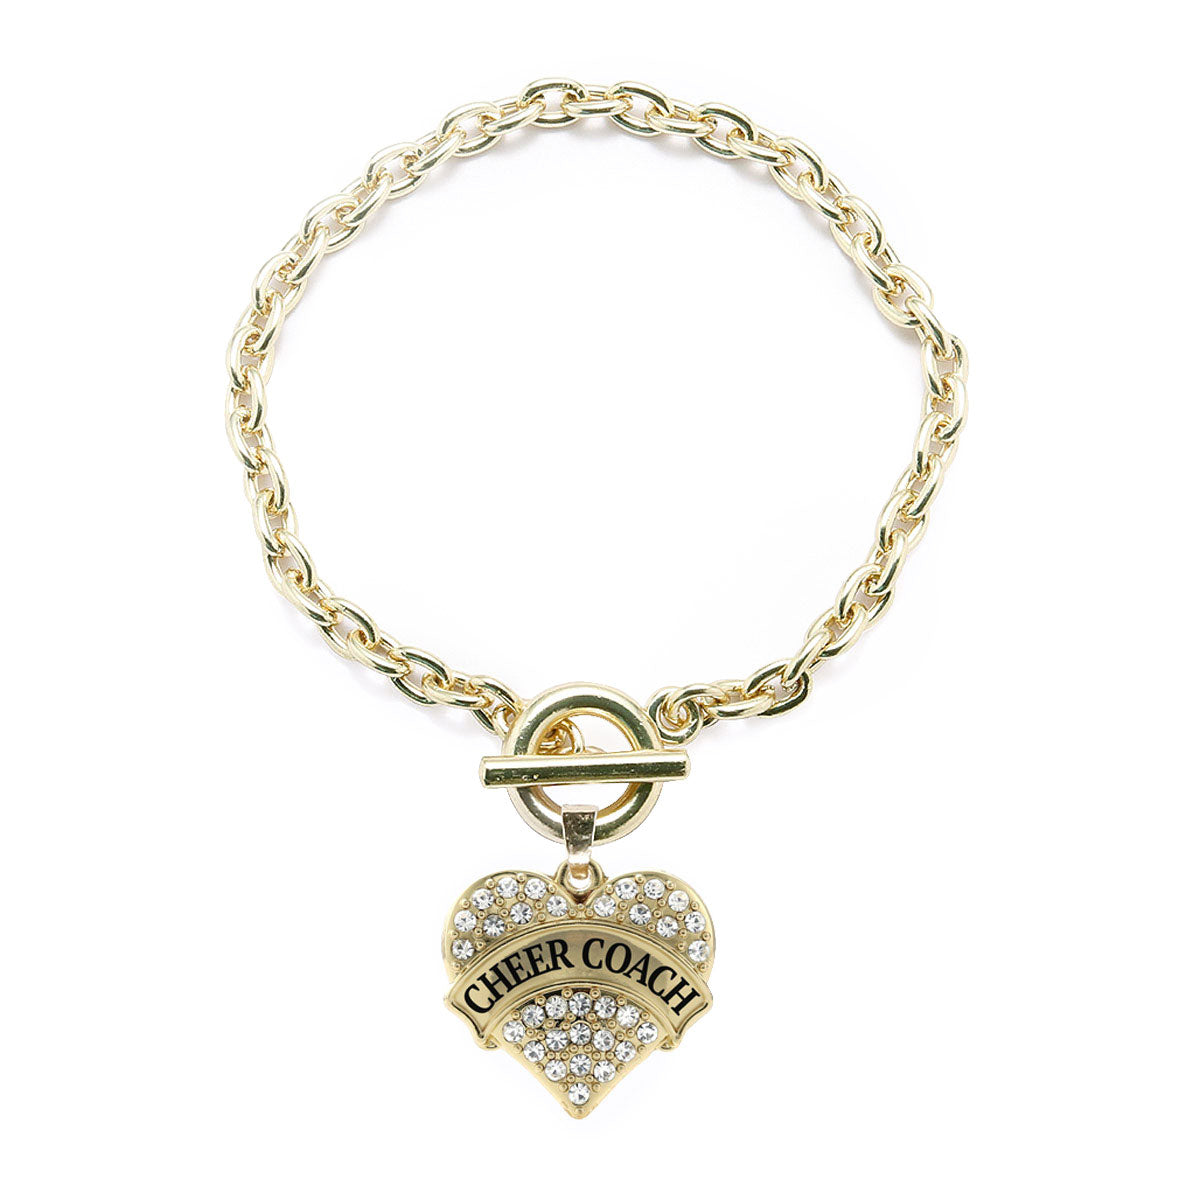 Gold Cheer Coach Pave Heart Charm Toggle Bracelet